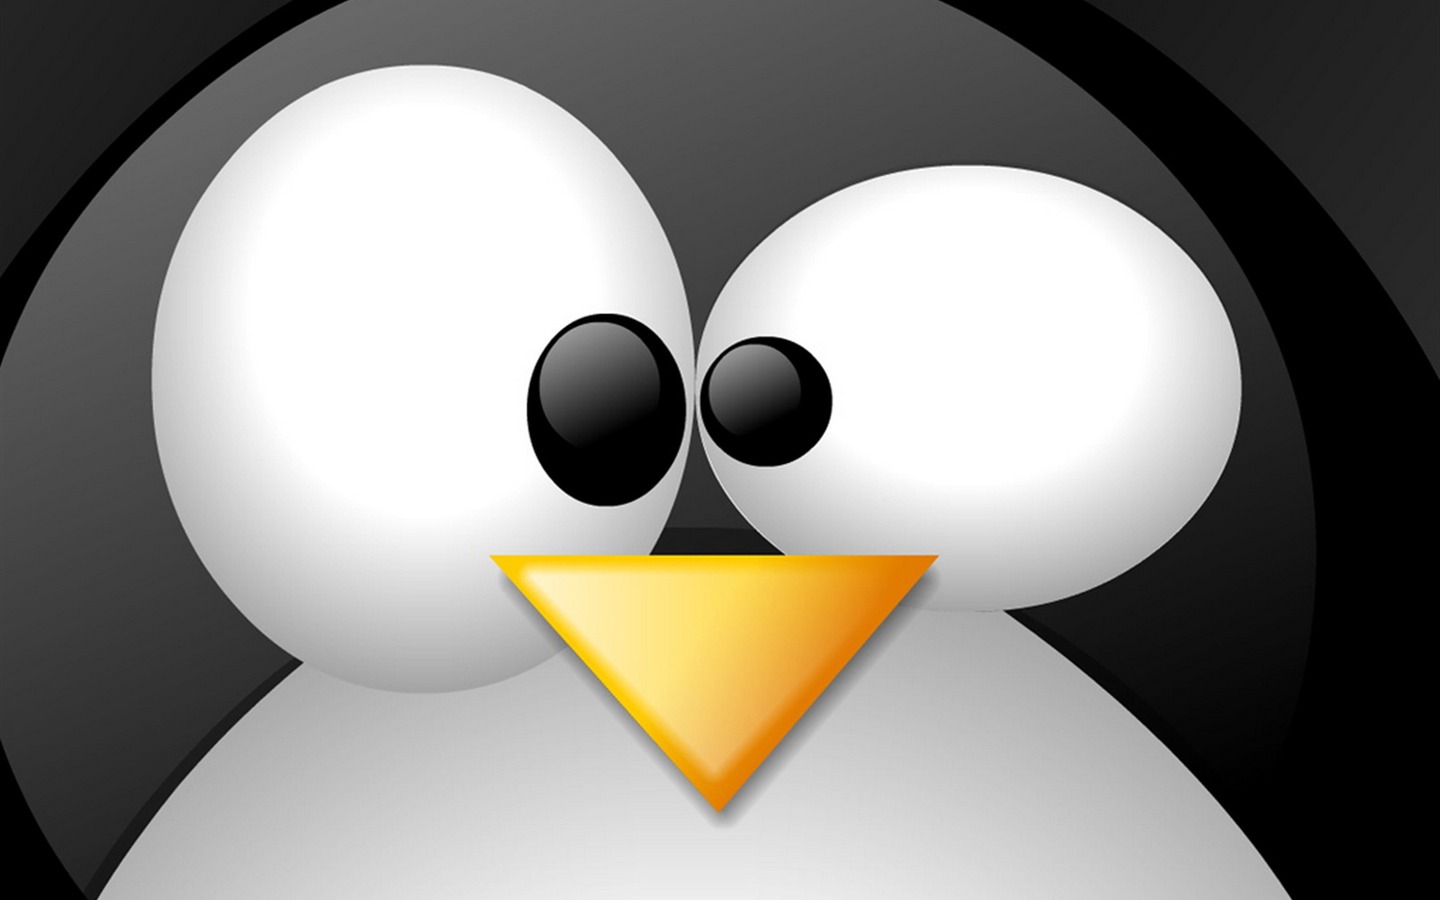 Linux tapety (3) #16 - 1440x900